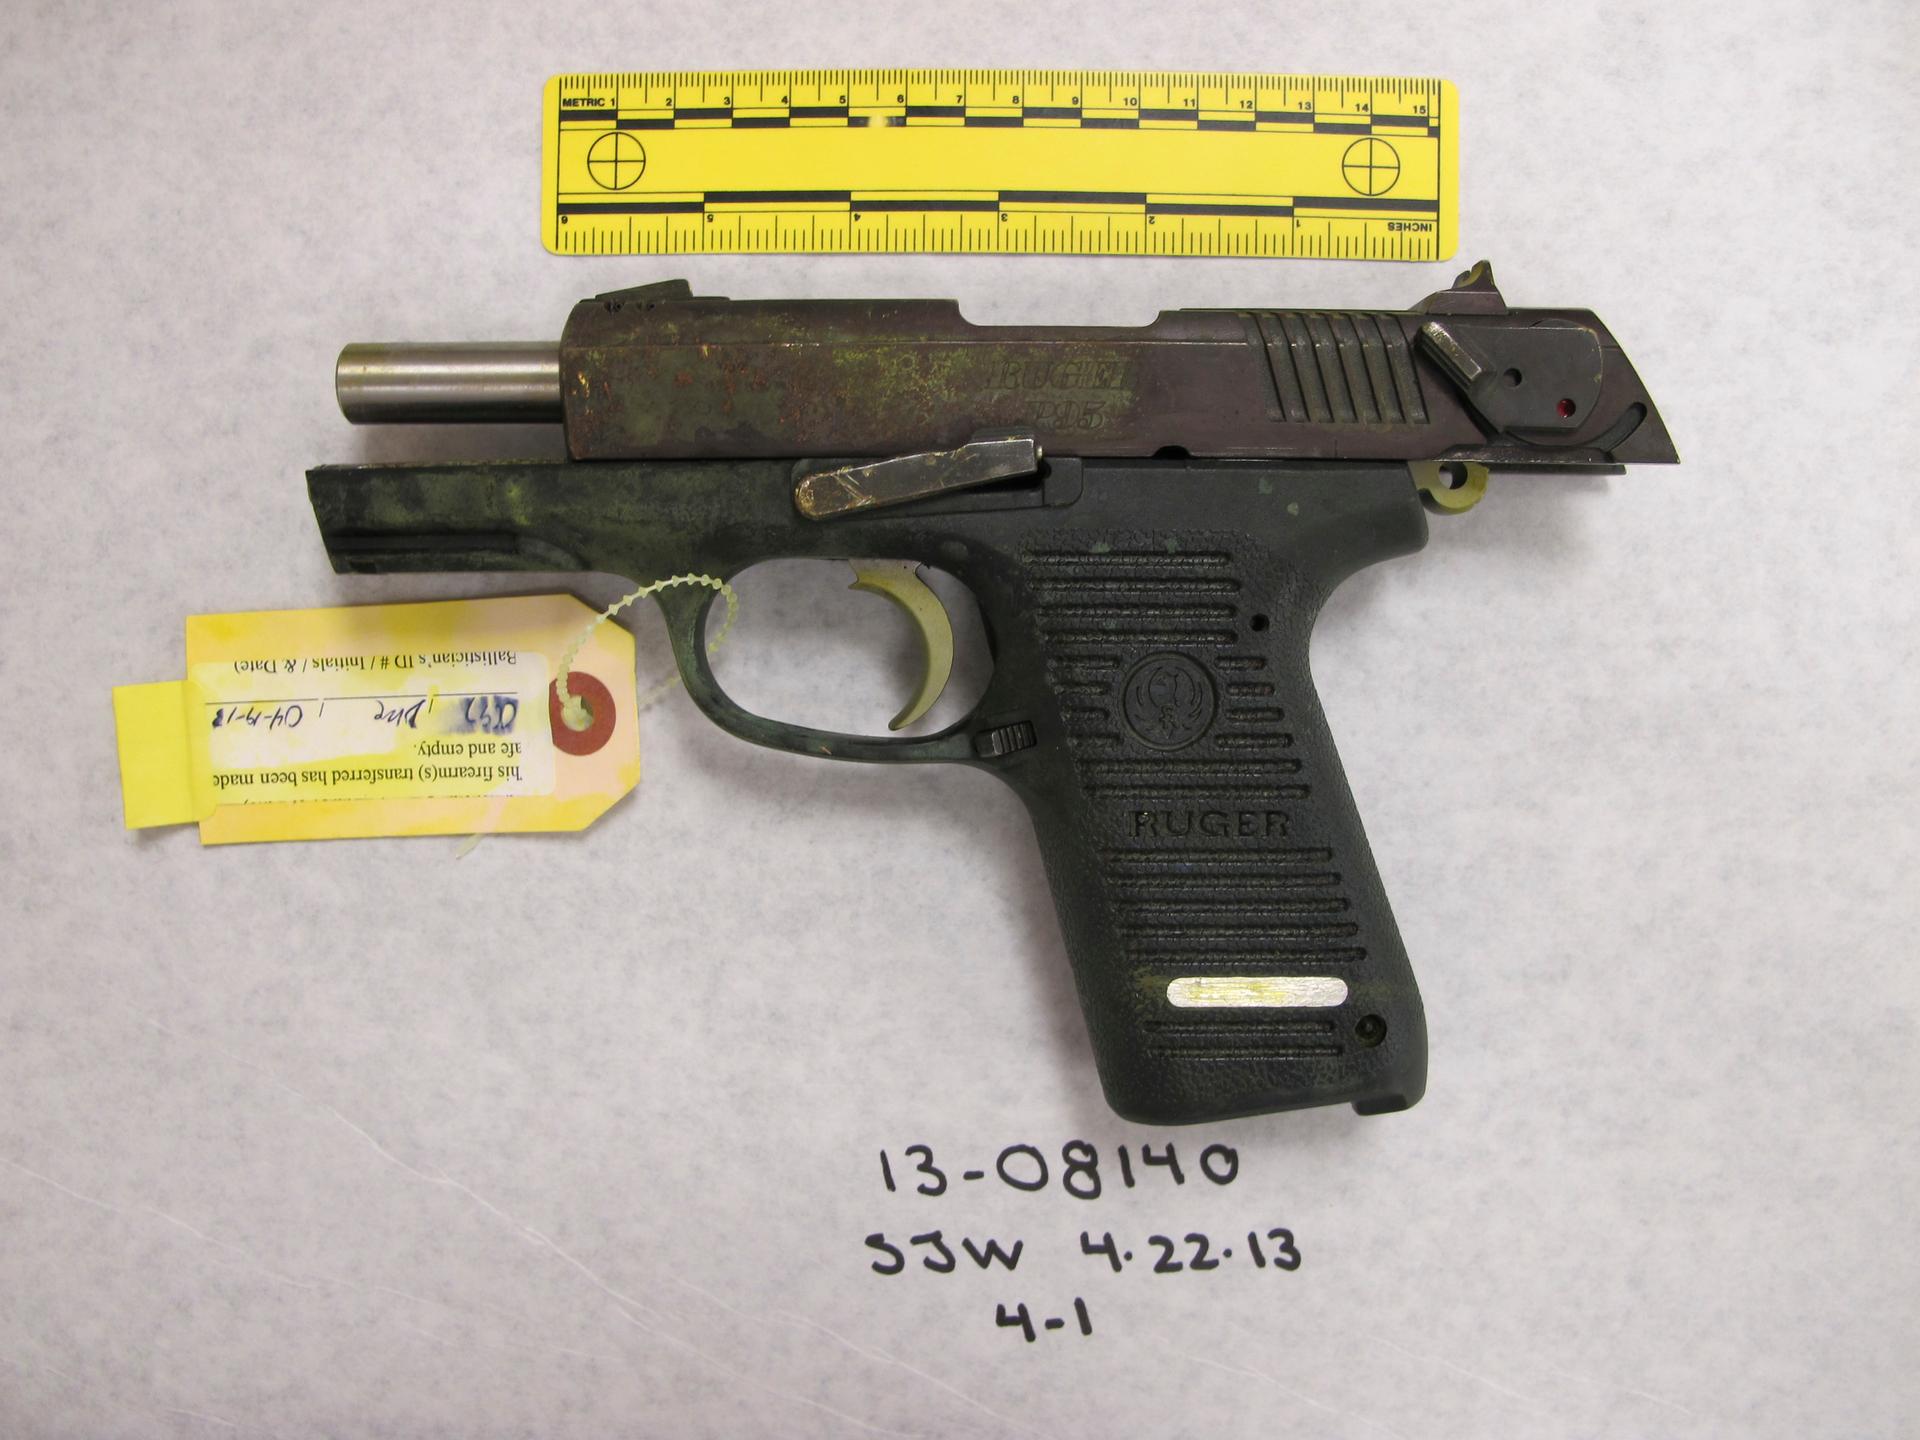 A photo entered as evidence in the trial of Boston Marathon bombing suspect Dzhokhar Tsarnaev shows a Ruger semi-automatic handgun supposedly used to kill MIT police officer Sean Collier.